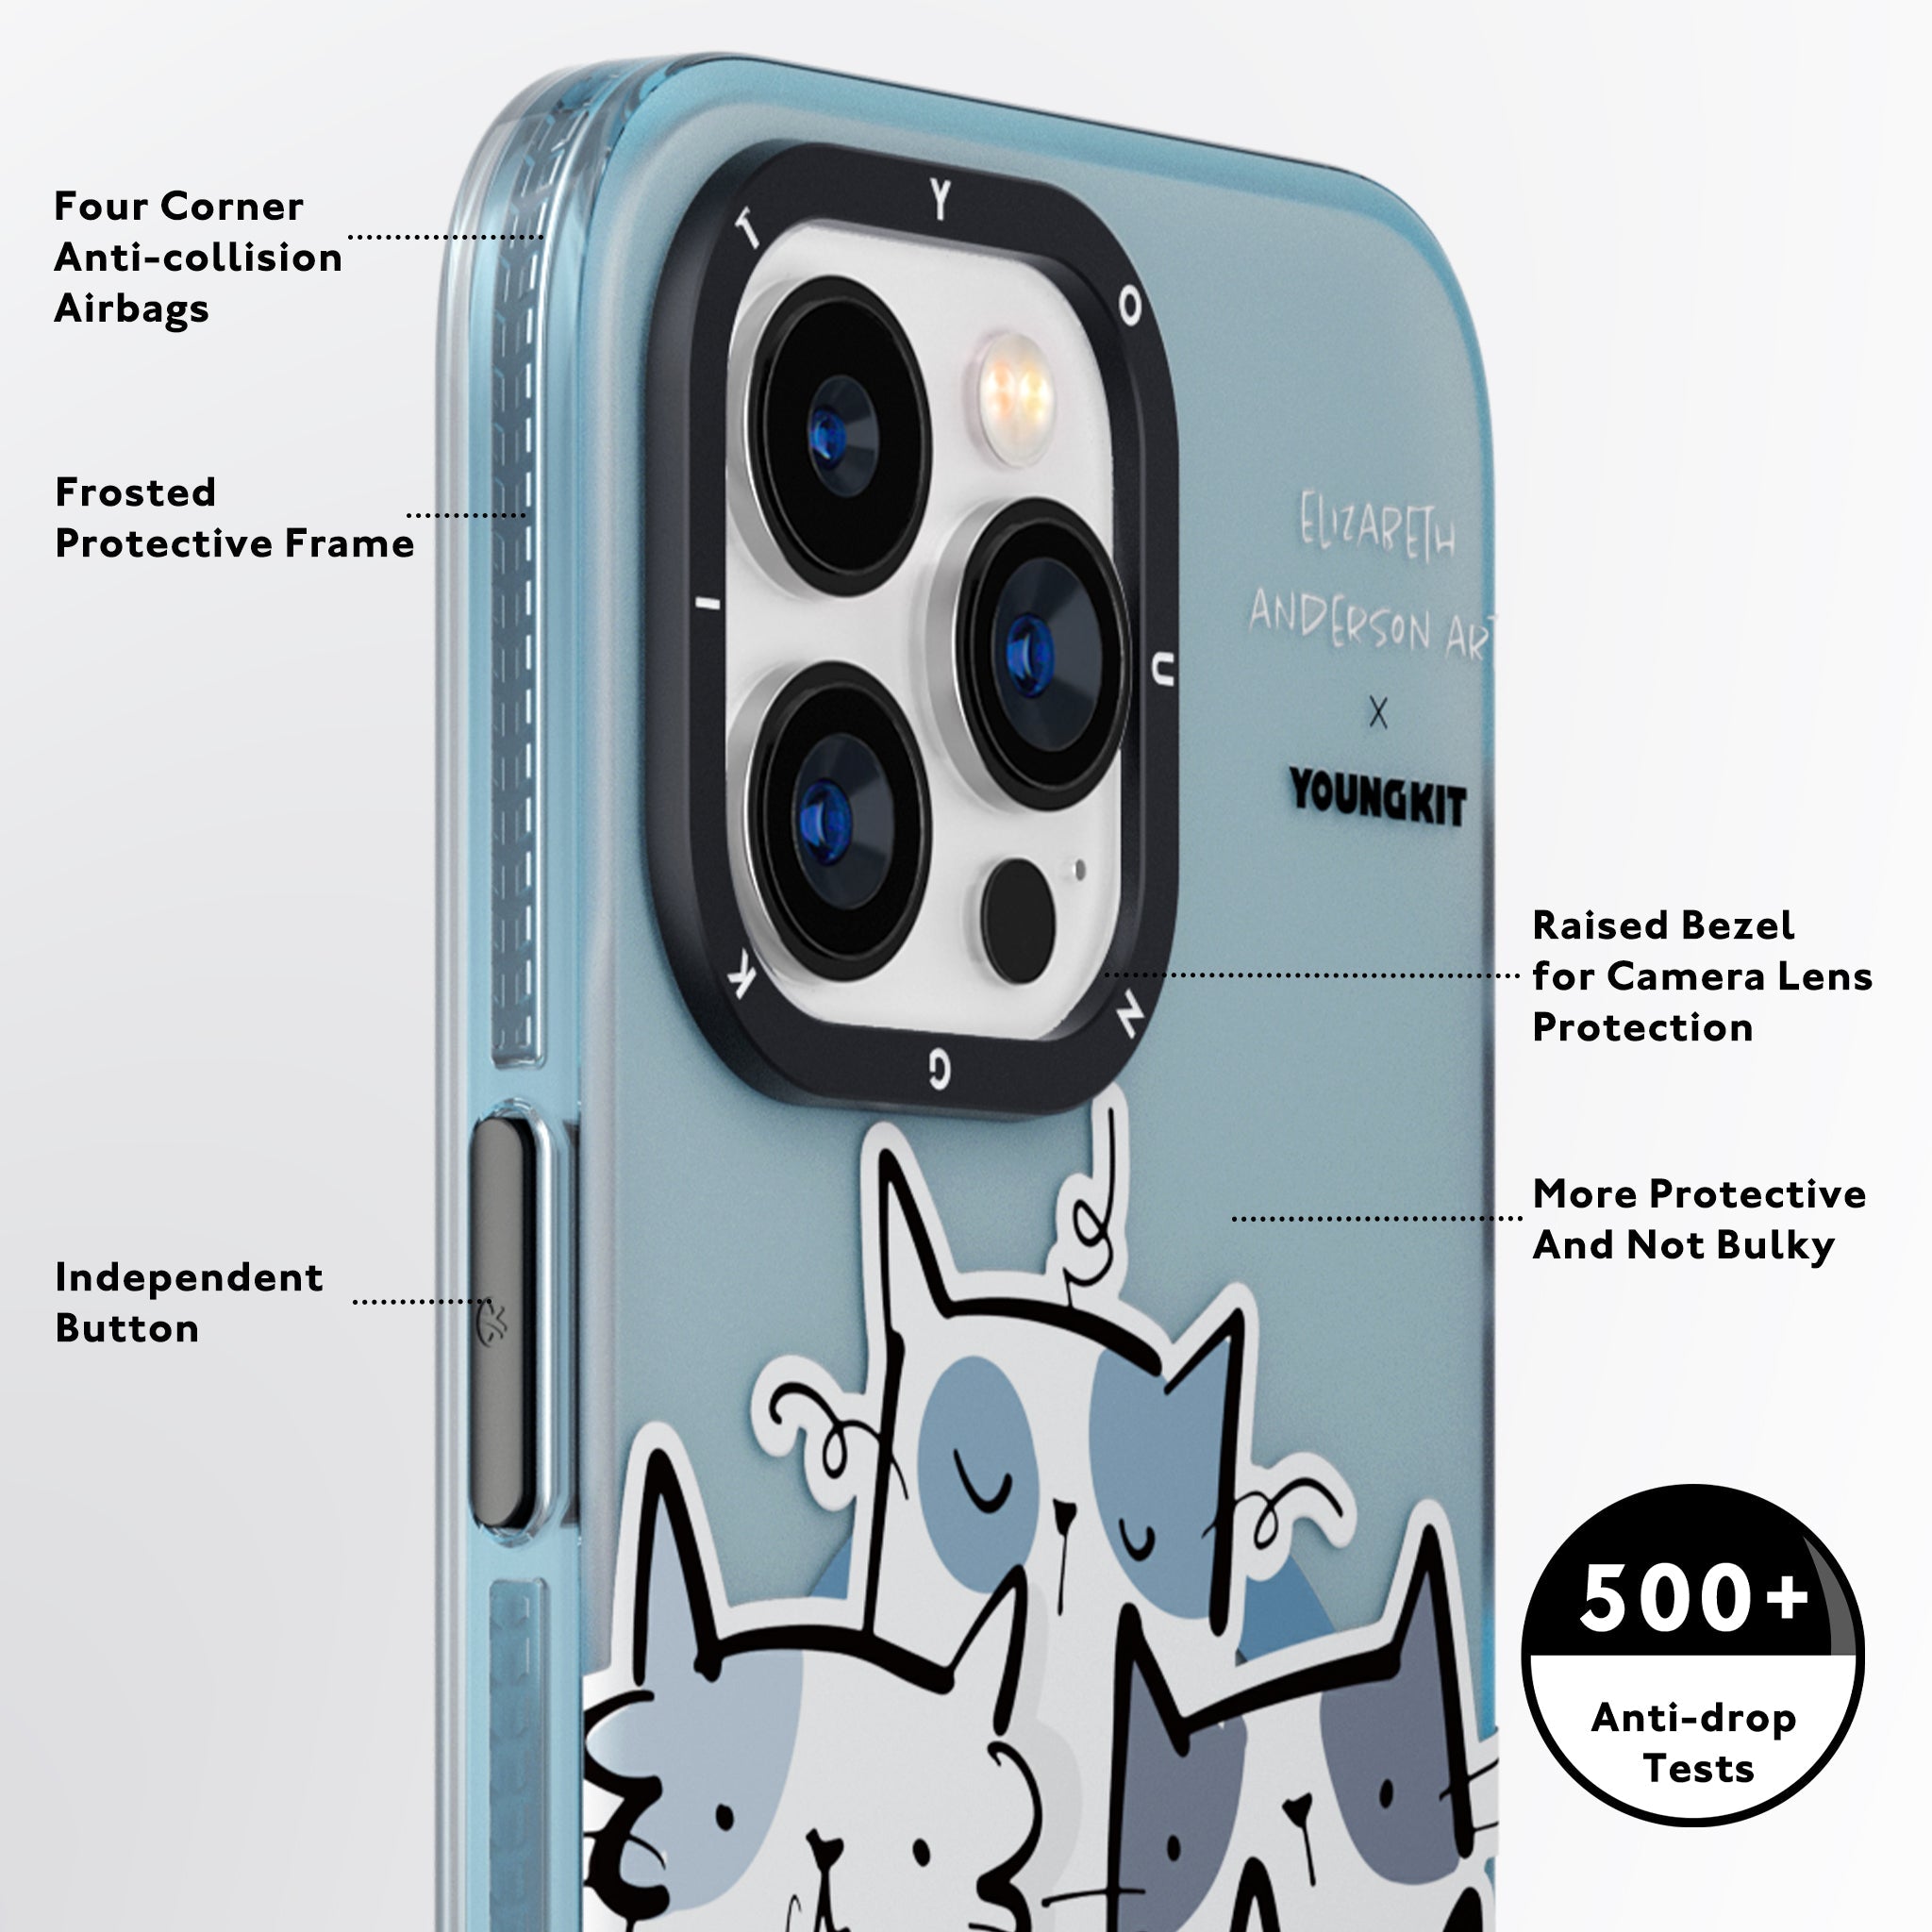 YOUNGKIT X Elizabeth Anderson Art MagSafe iPhone15 Case-Carnival